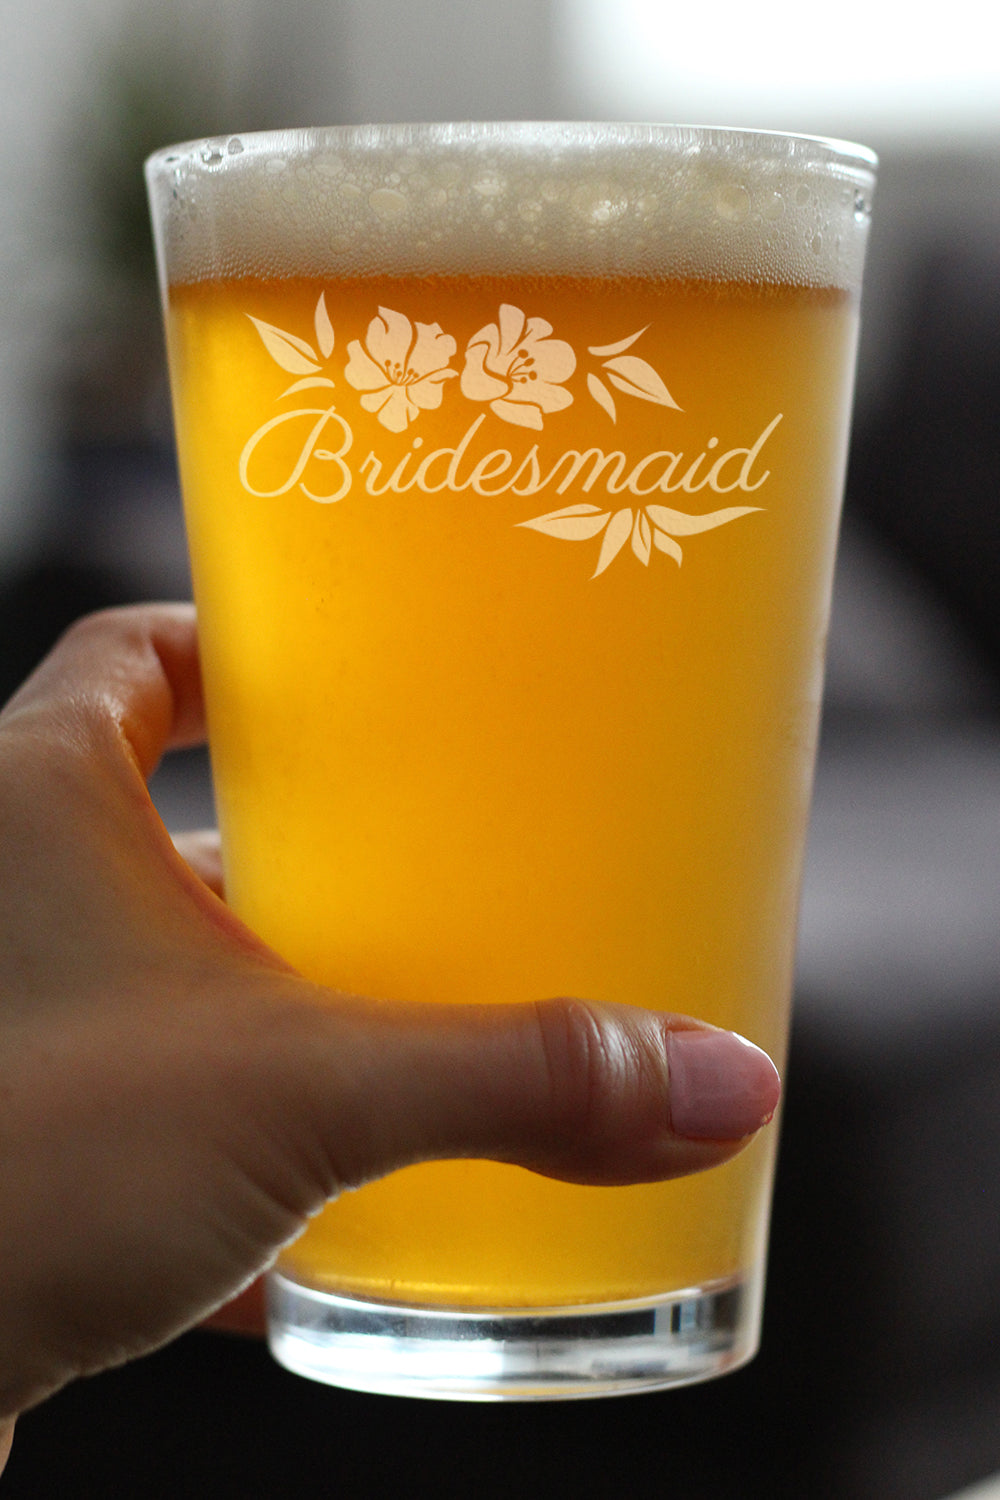 Bridesmaid Pint Glass - Bridesmaids Proposal Gifts - Unique Engraved Wedding Cup Gift